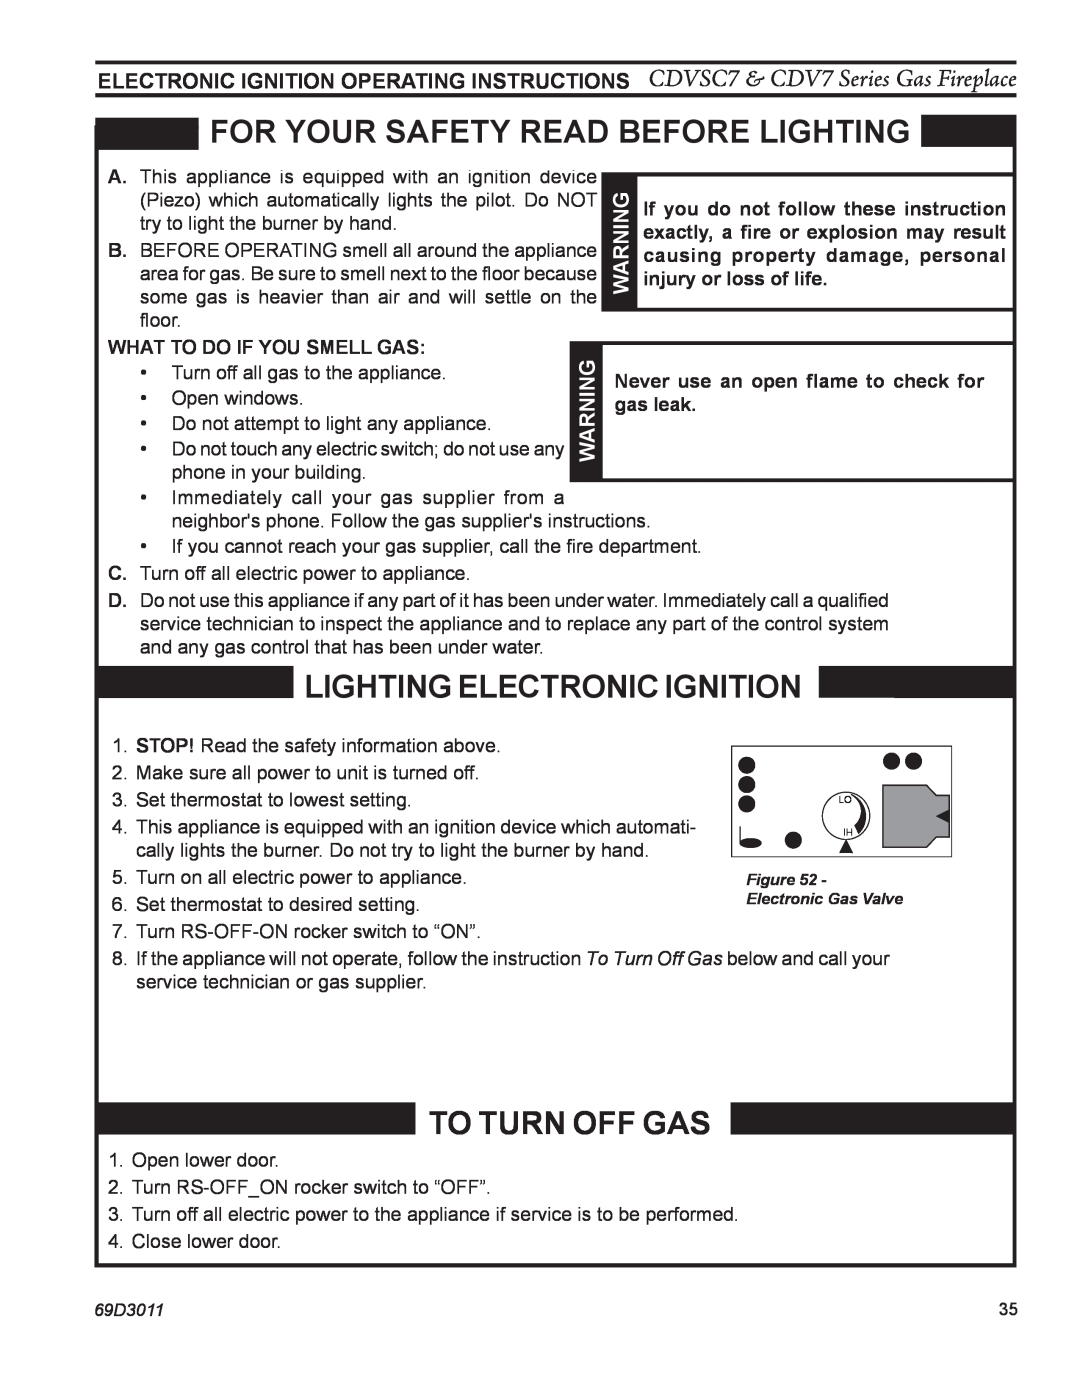 Monessen Hearth CDV7 manual Lighting electronic ignition, If you do not follow these instruction, injury or loss of life 